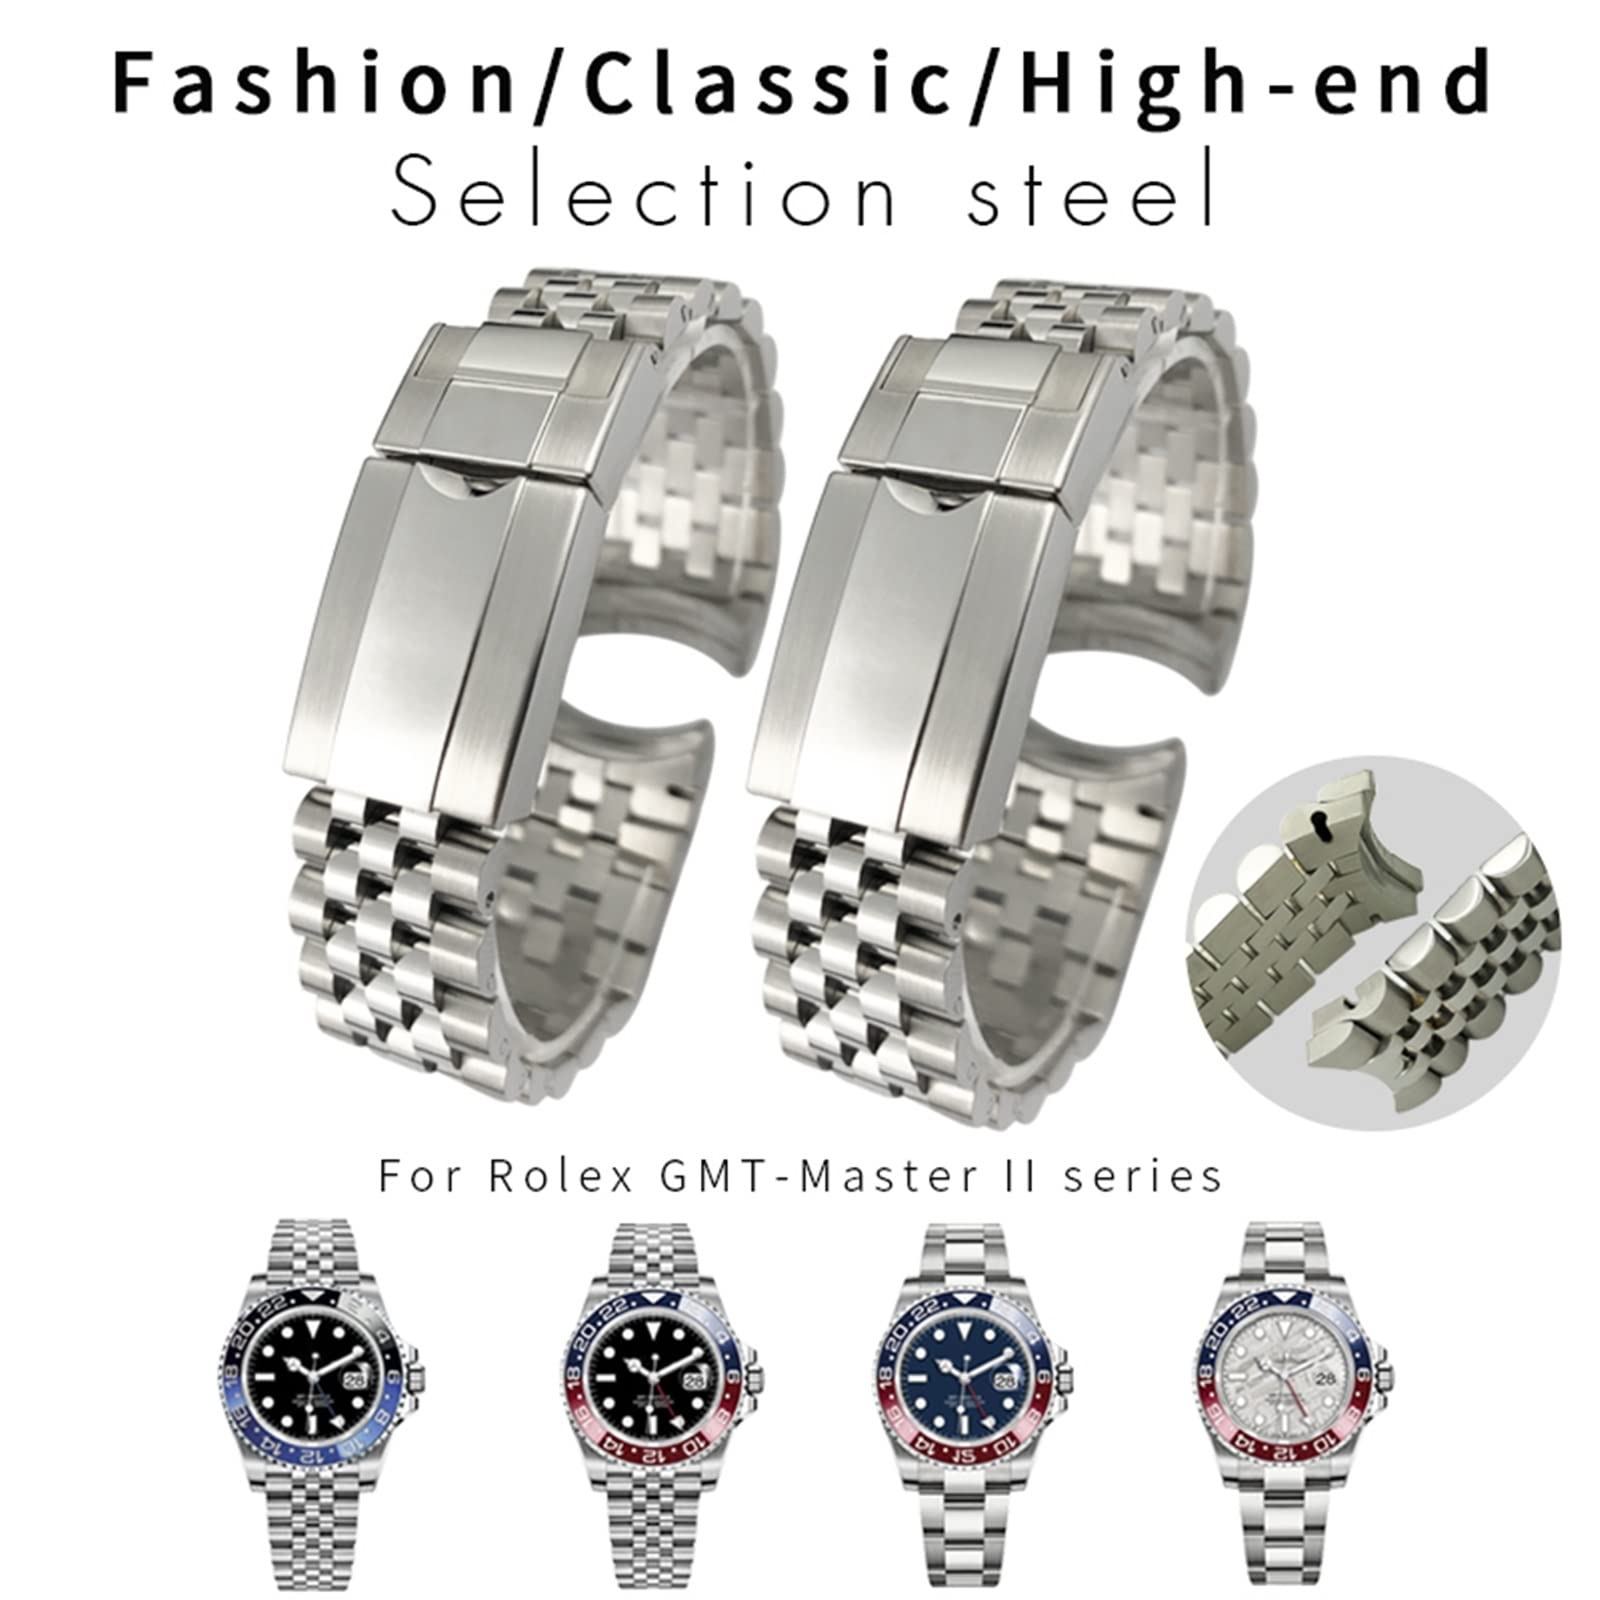 AEMALL 20mm 904L Solid Stainless Steel Watchband for Rolex Strap GMT Master II Wrist Watch Band Bracelet Jubilee with Oyster Clasp